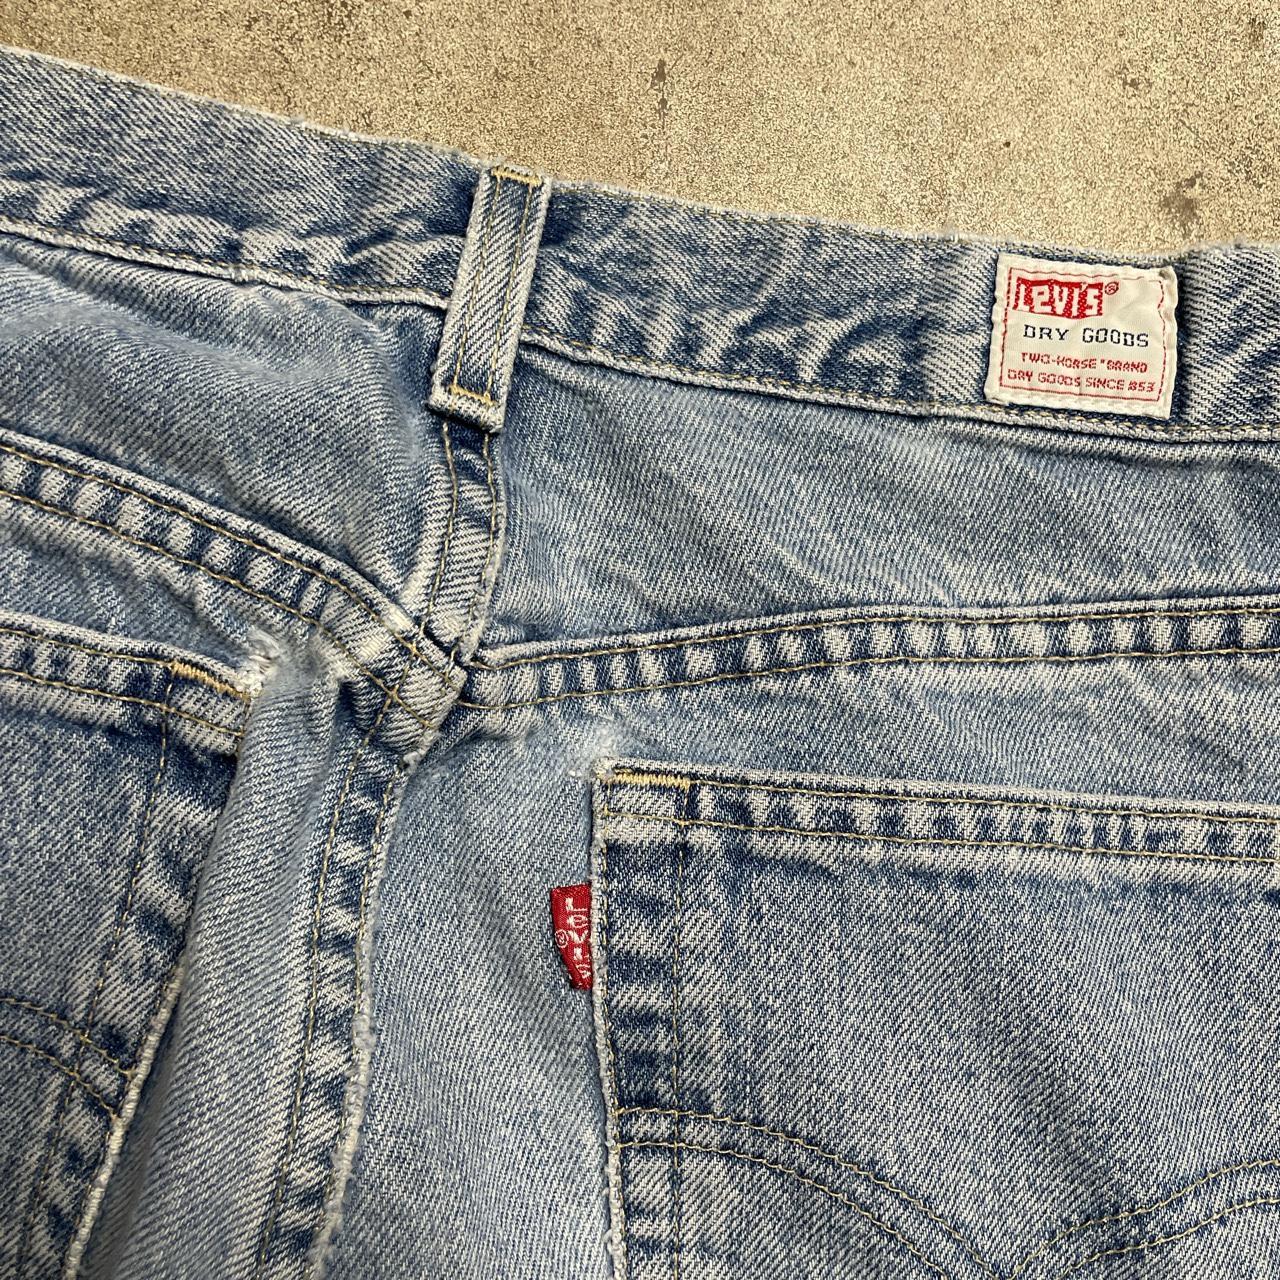 Levi's Women's Blue and White Jeans | Depop